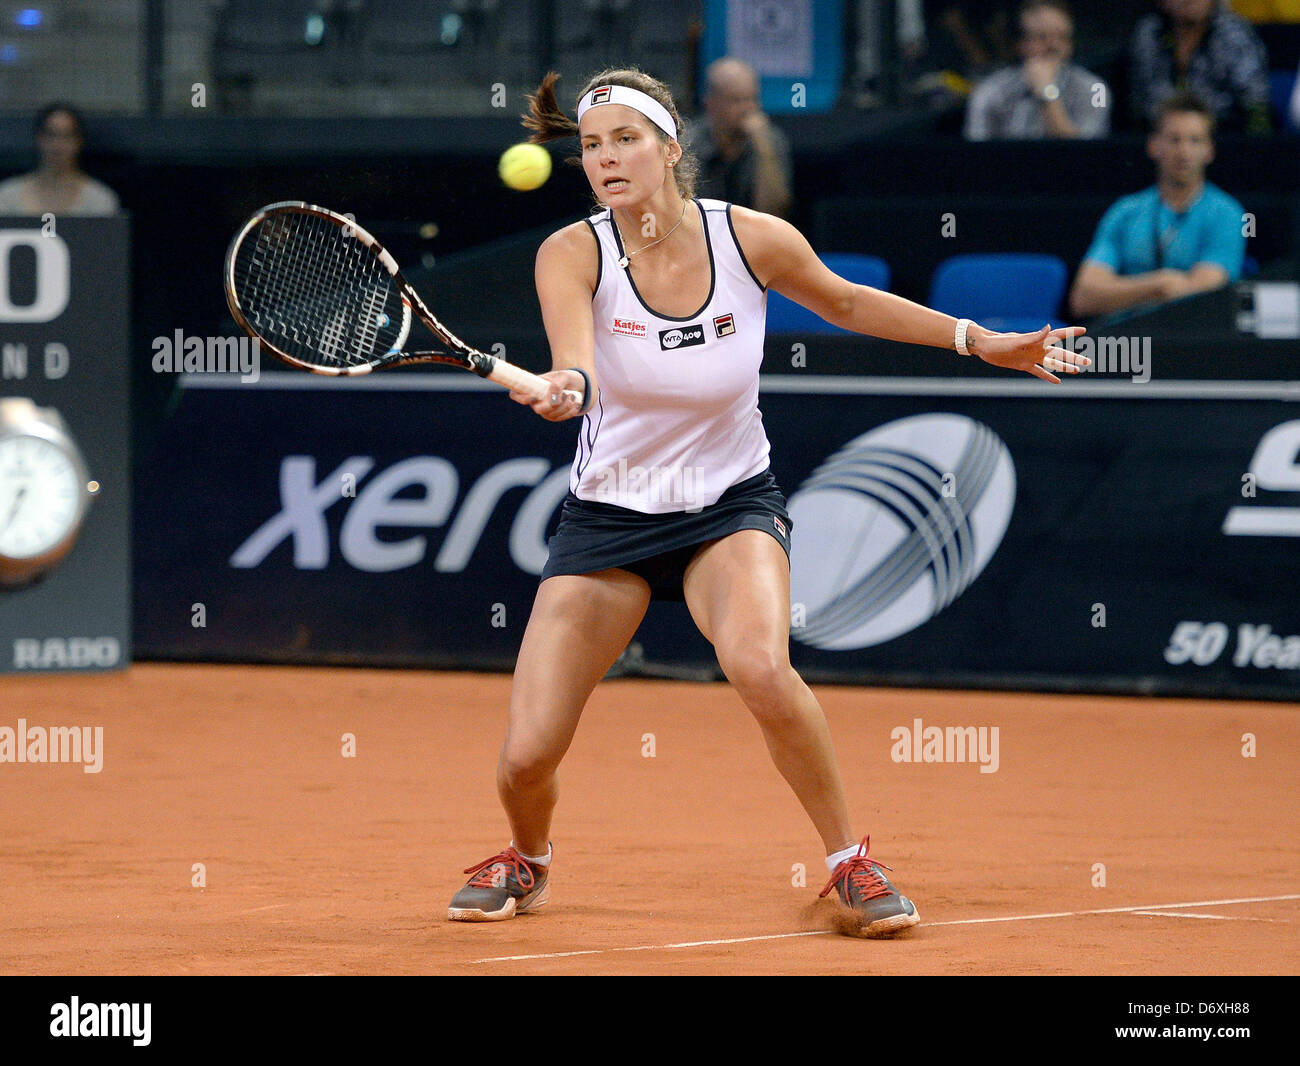 Julia Georges from Germany hits the ball during the first-round match of  the WTA Tennis Grand Prix against Flipkens from Belgium at Porsche Arena in  Stuttgart, Germany, 24 April 2013. Photo: DANIEL